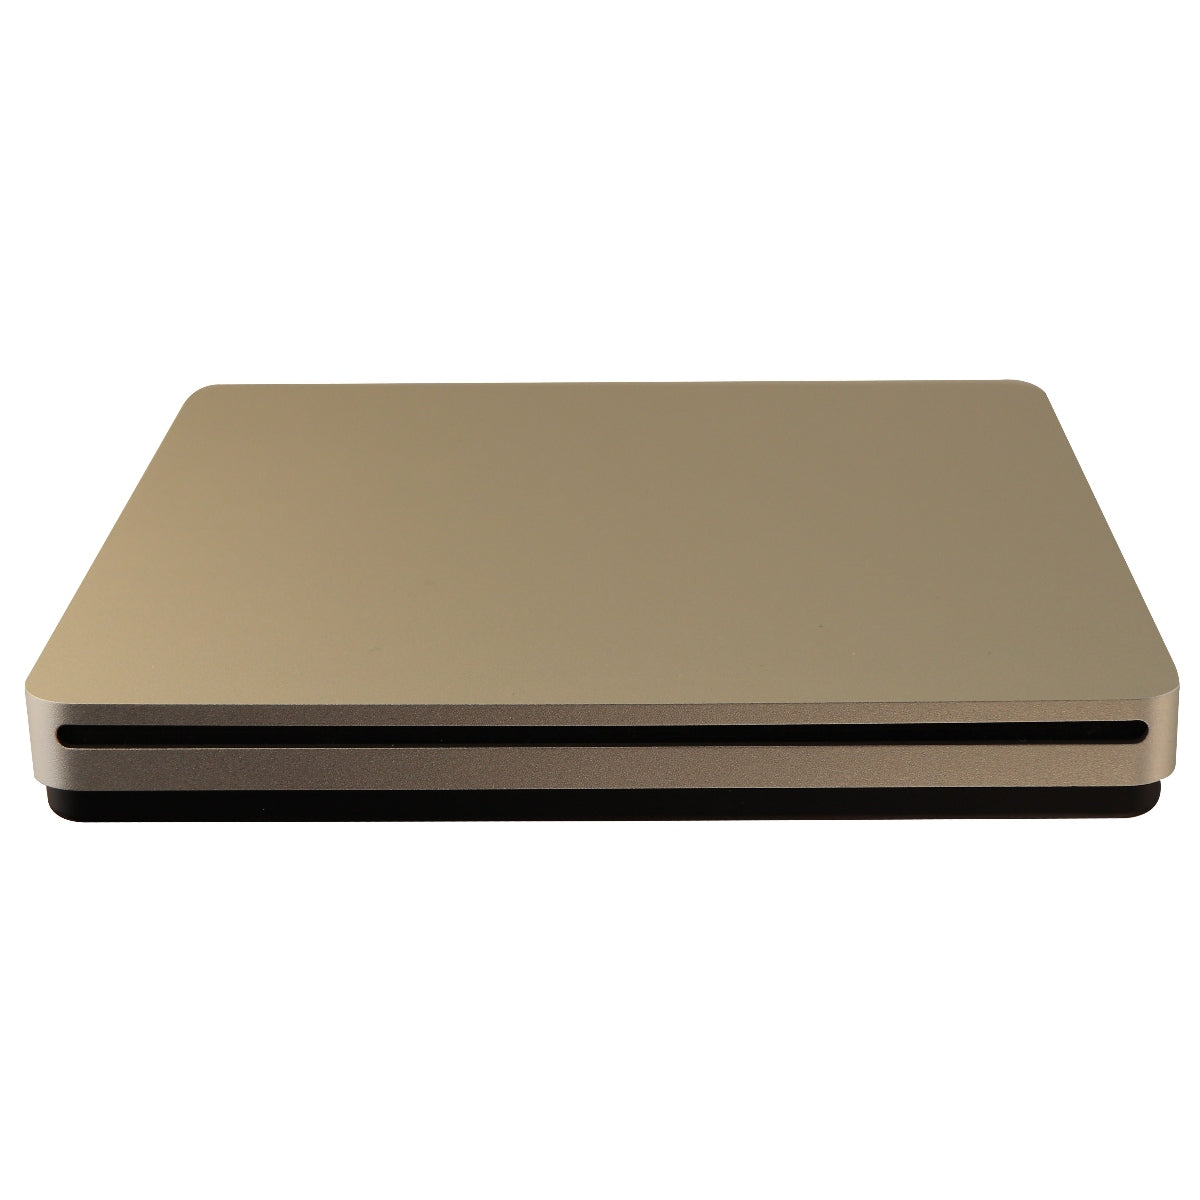 Apple USB Superdrive A1379 (MD564LL/A) Silver External CD DVD Disk Drive CD, DVD & Blu-ray Drives Apple    - Simple Cell Bulk Wholesale Pricing - USA Seller